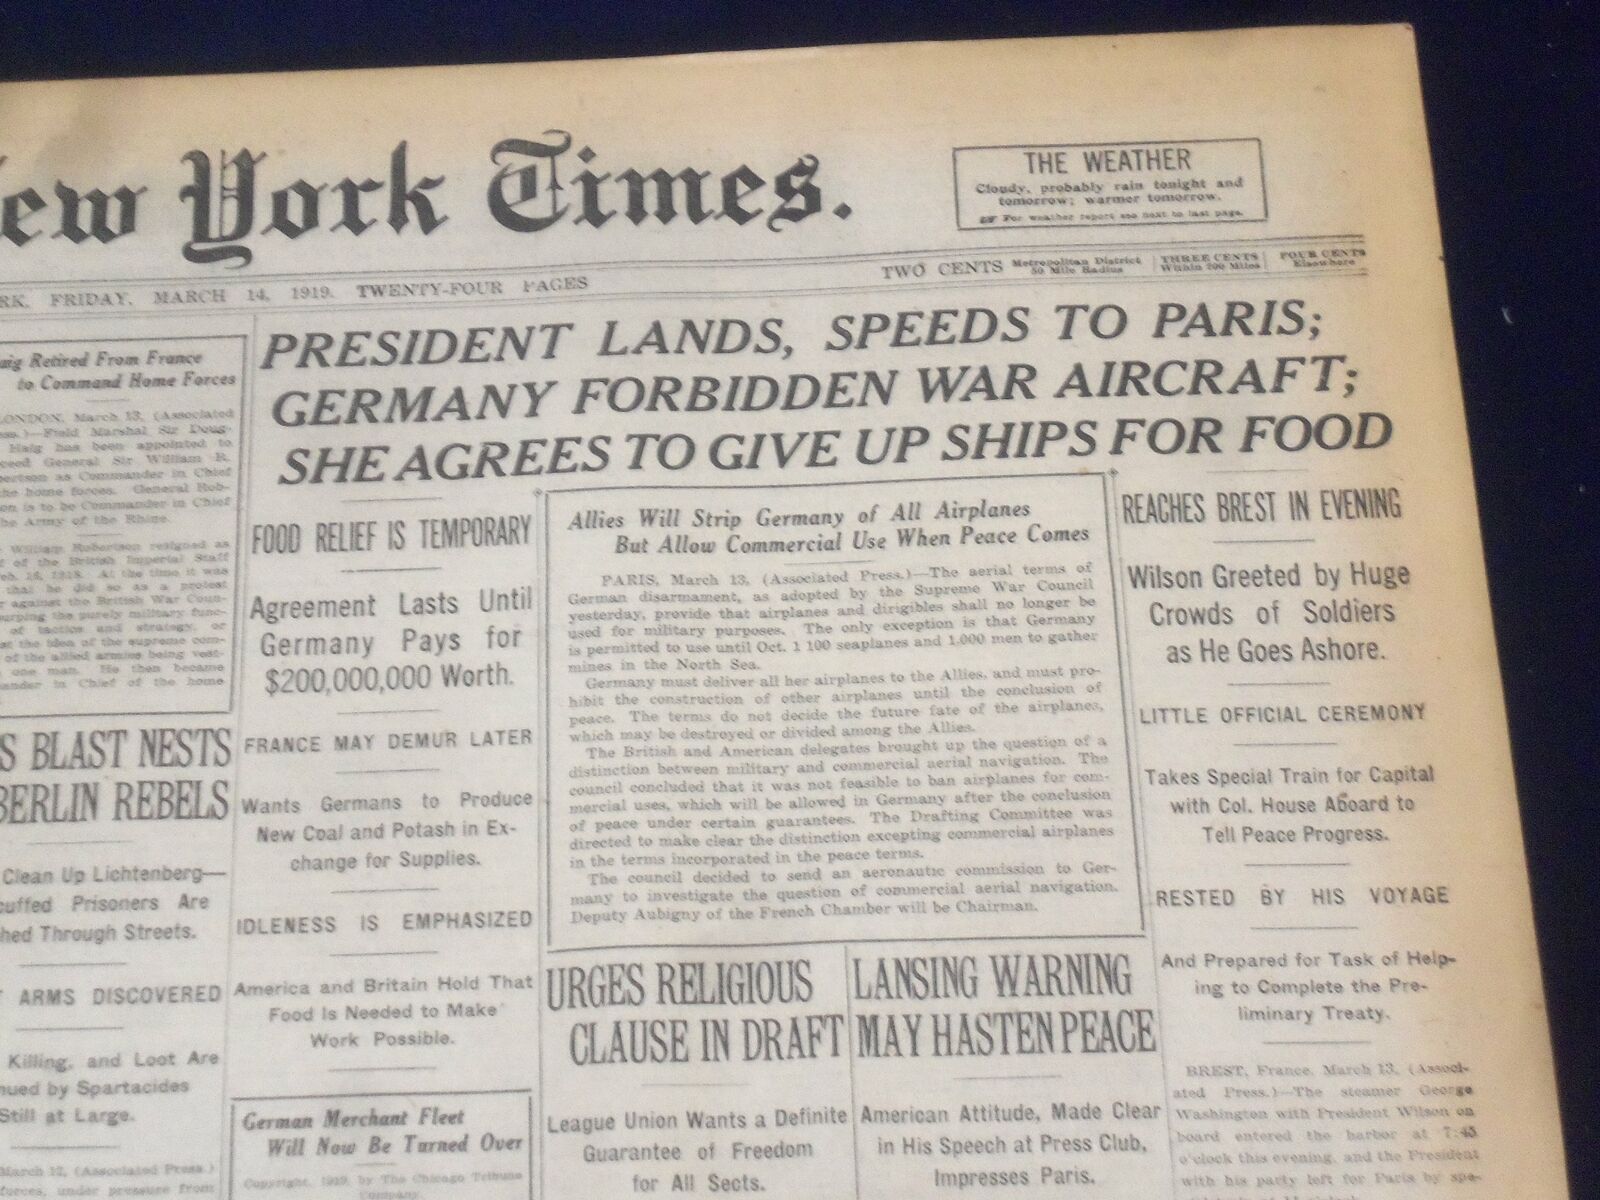 1919 MARCH 14 NEW YORK TIMES - PRESIDENT LANDS, SPEEDS TO PARIS - NT 9274